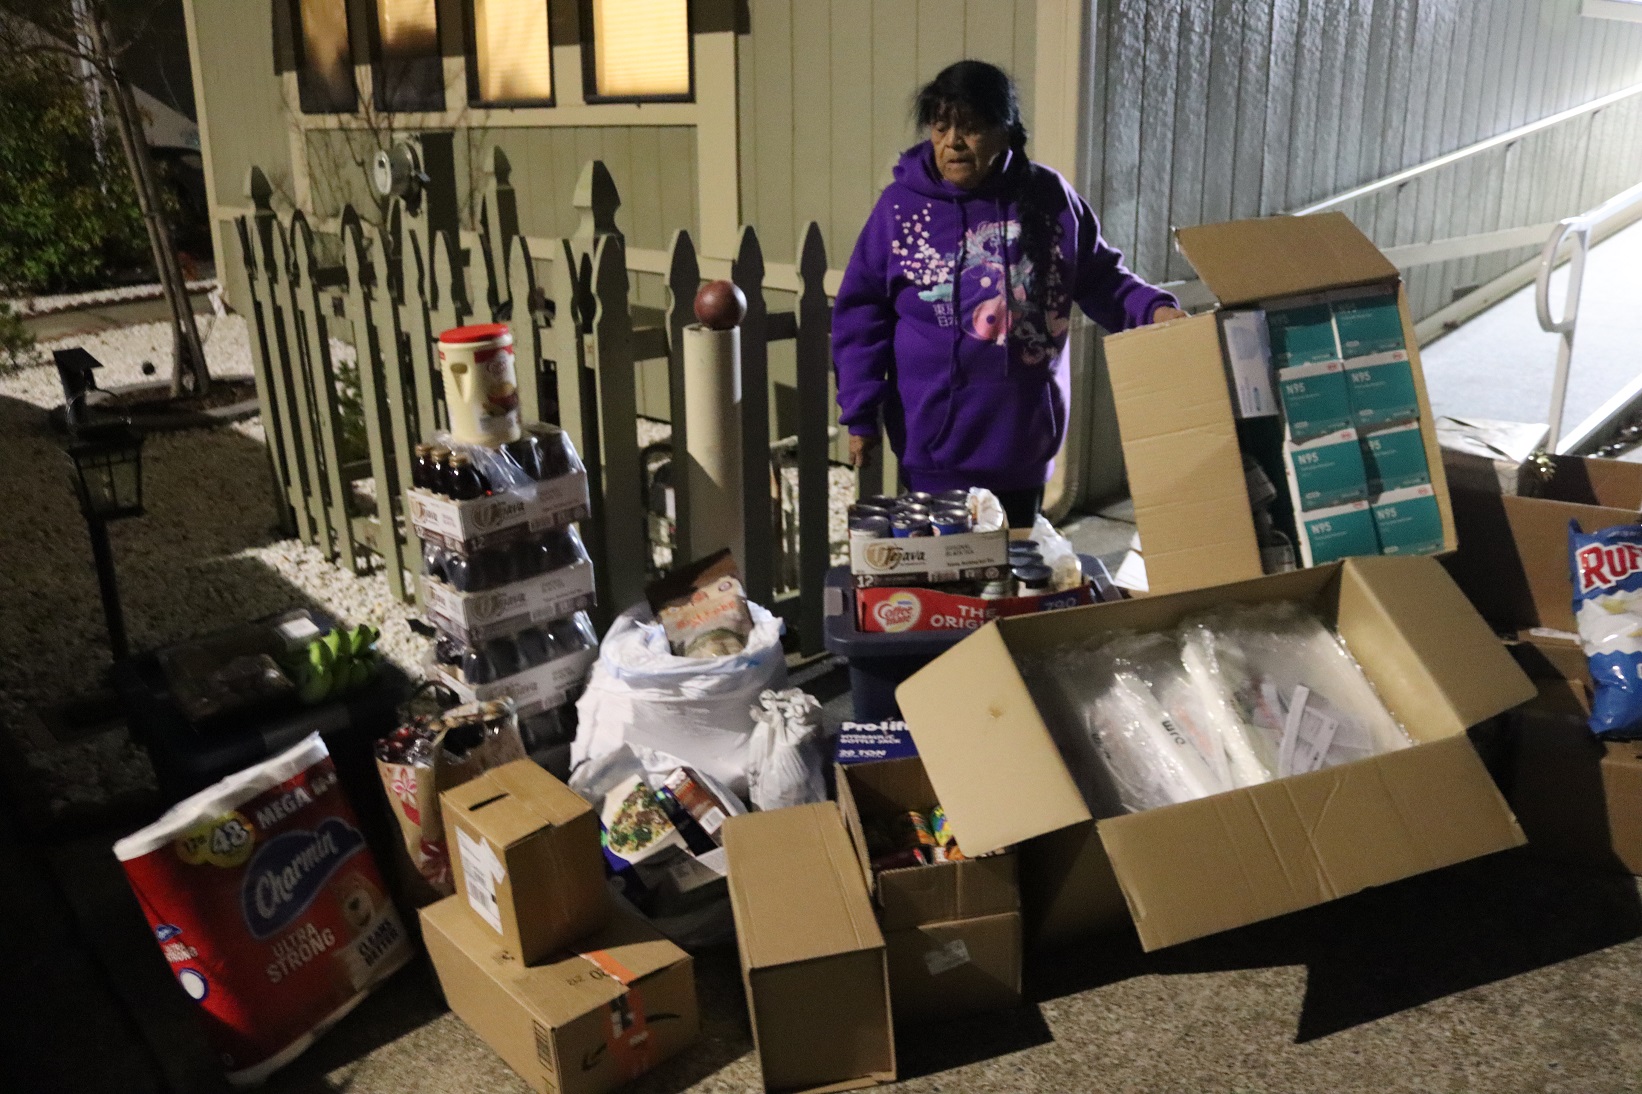 California Valley Miwok Tribe's elder Mildred Burley standing with supplies from Food for Tribal Families Program.